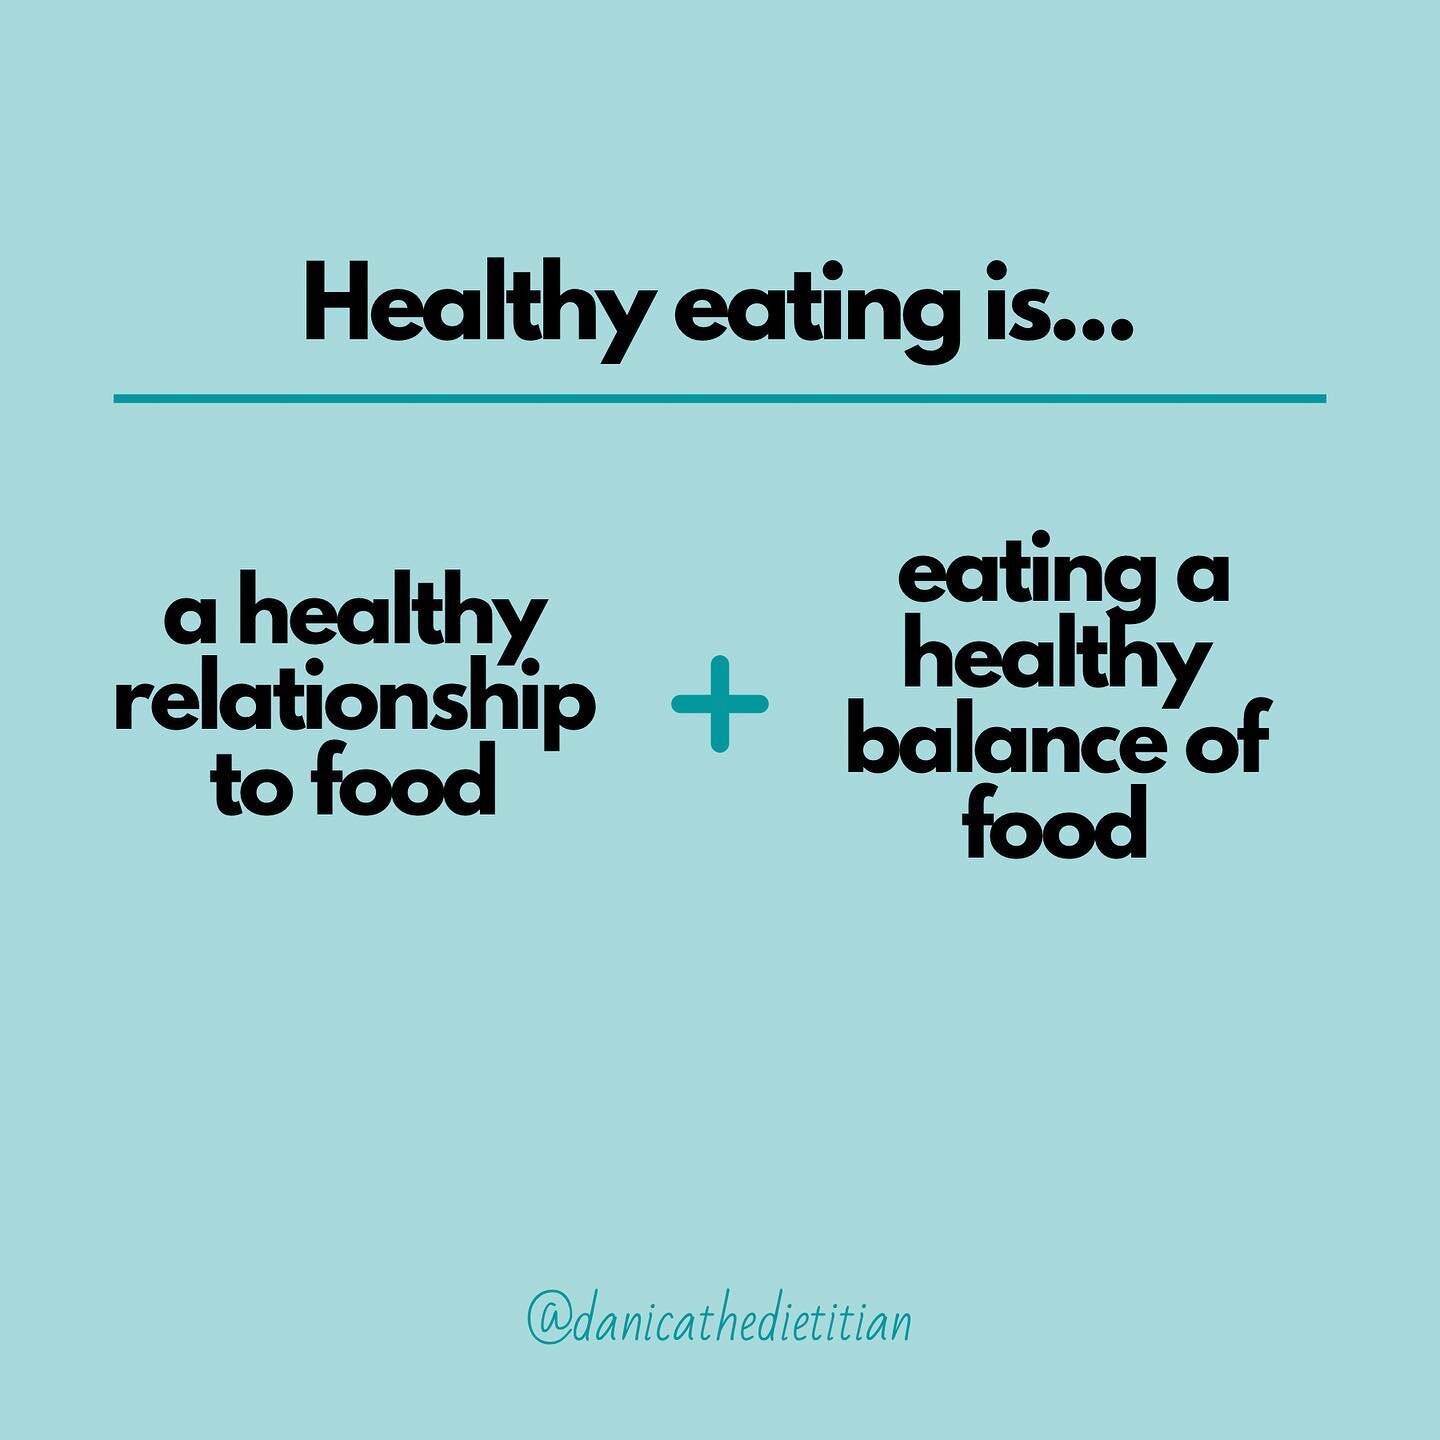 Our relationship to food is a VERY underrated part of healthy eating.

Most things we read about healthy eating are focused on things we should and shouldn&rsquo;t eat. The new superfood we NEED to try. Allll the healthified versions of recipes. The 